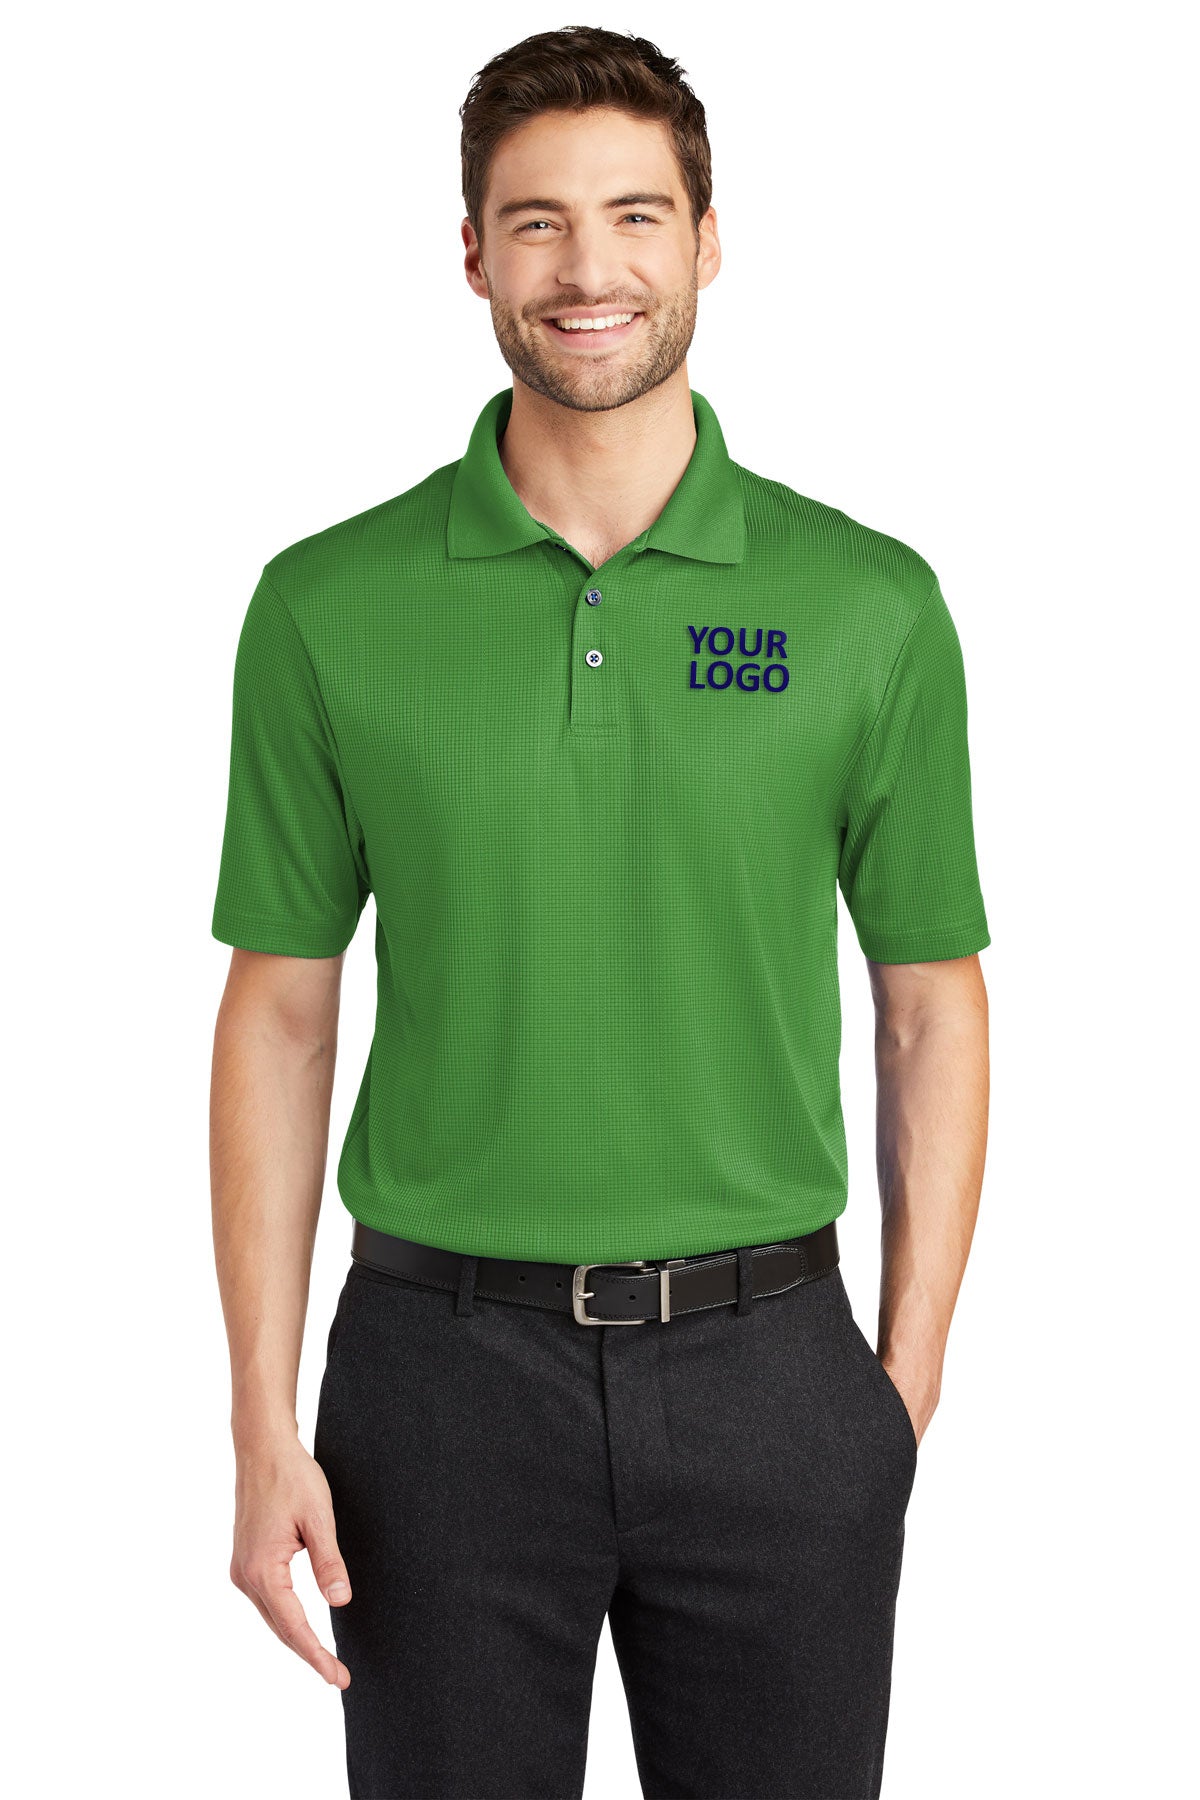 port authority vine green k528 work polo shirts with logo